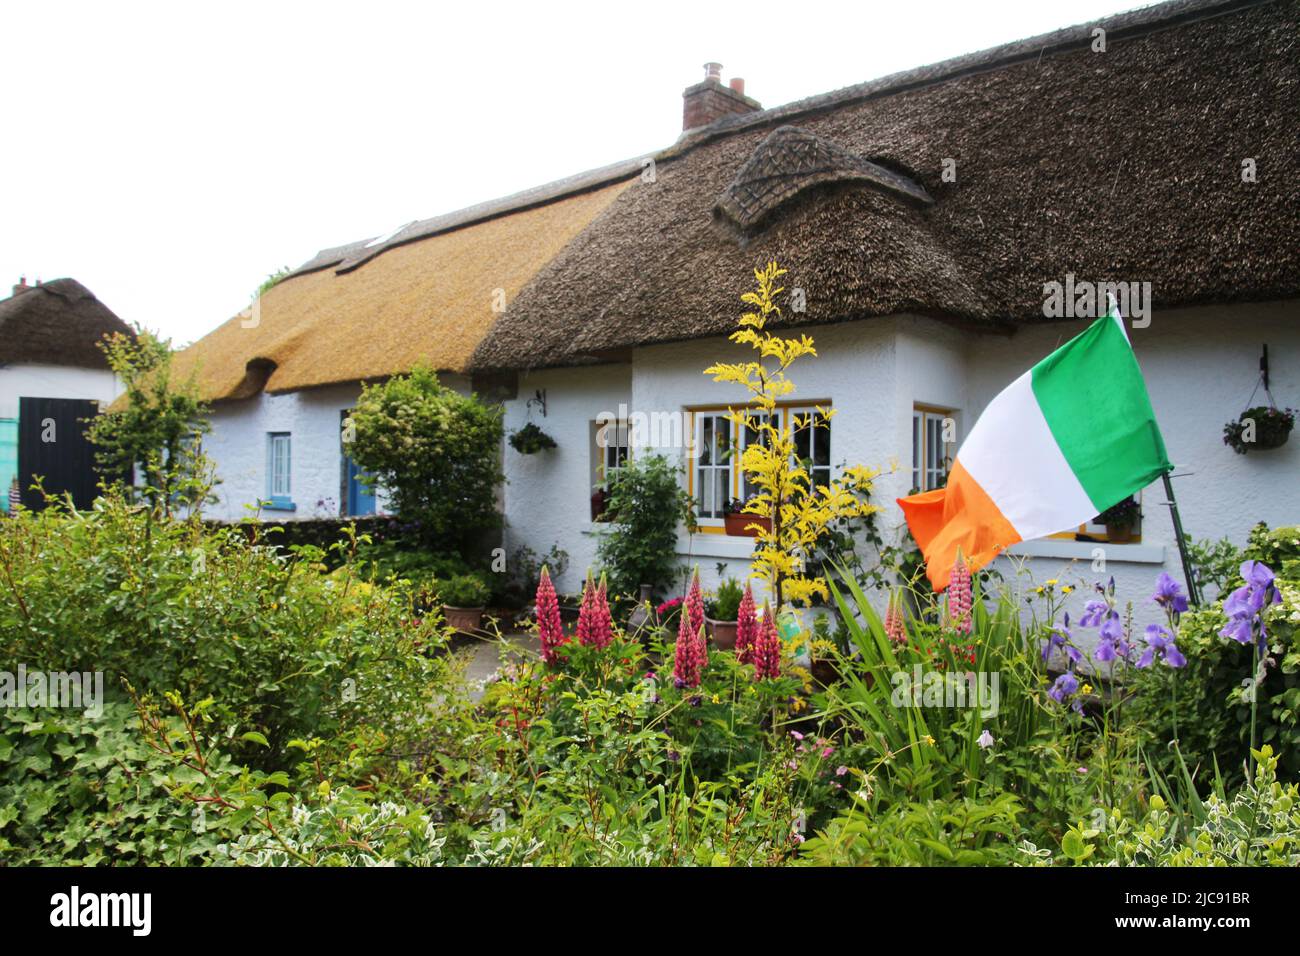 Irish cottages house in Adare, County Limerick, Ireland Stock Photo